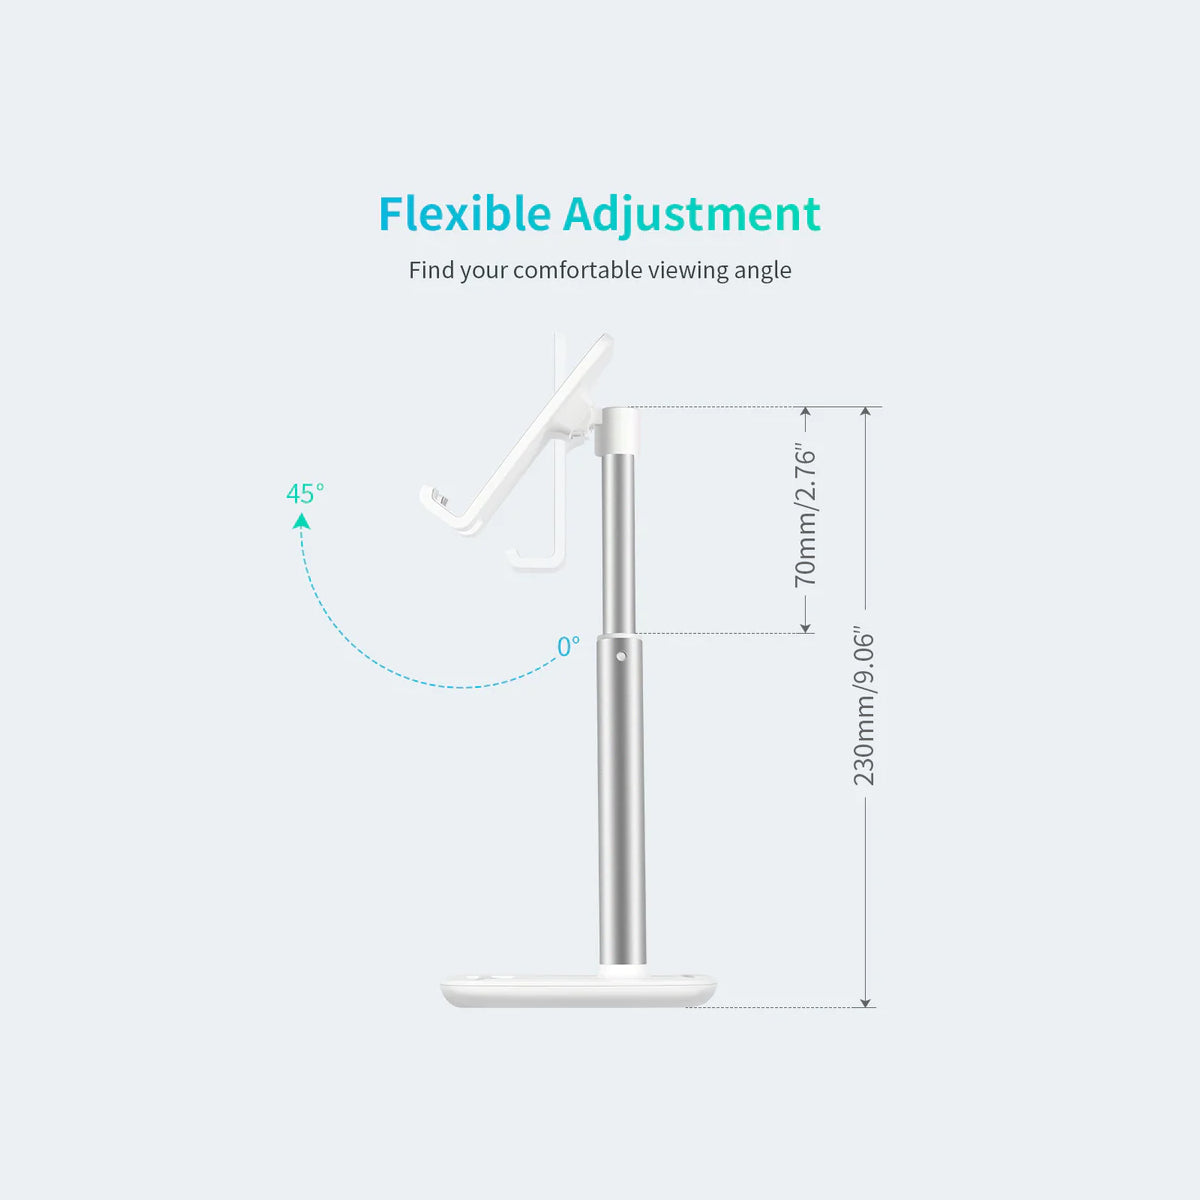 Choetech Adjustable Height Phone Stand (H035)